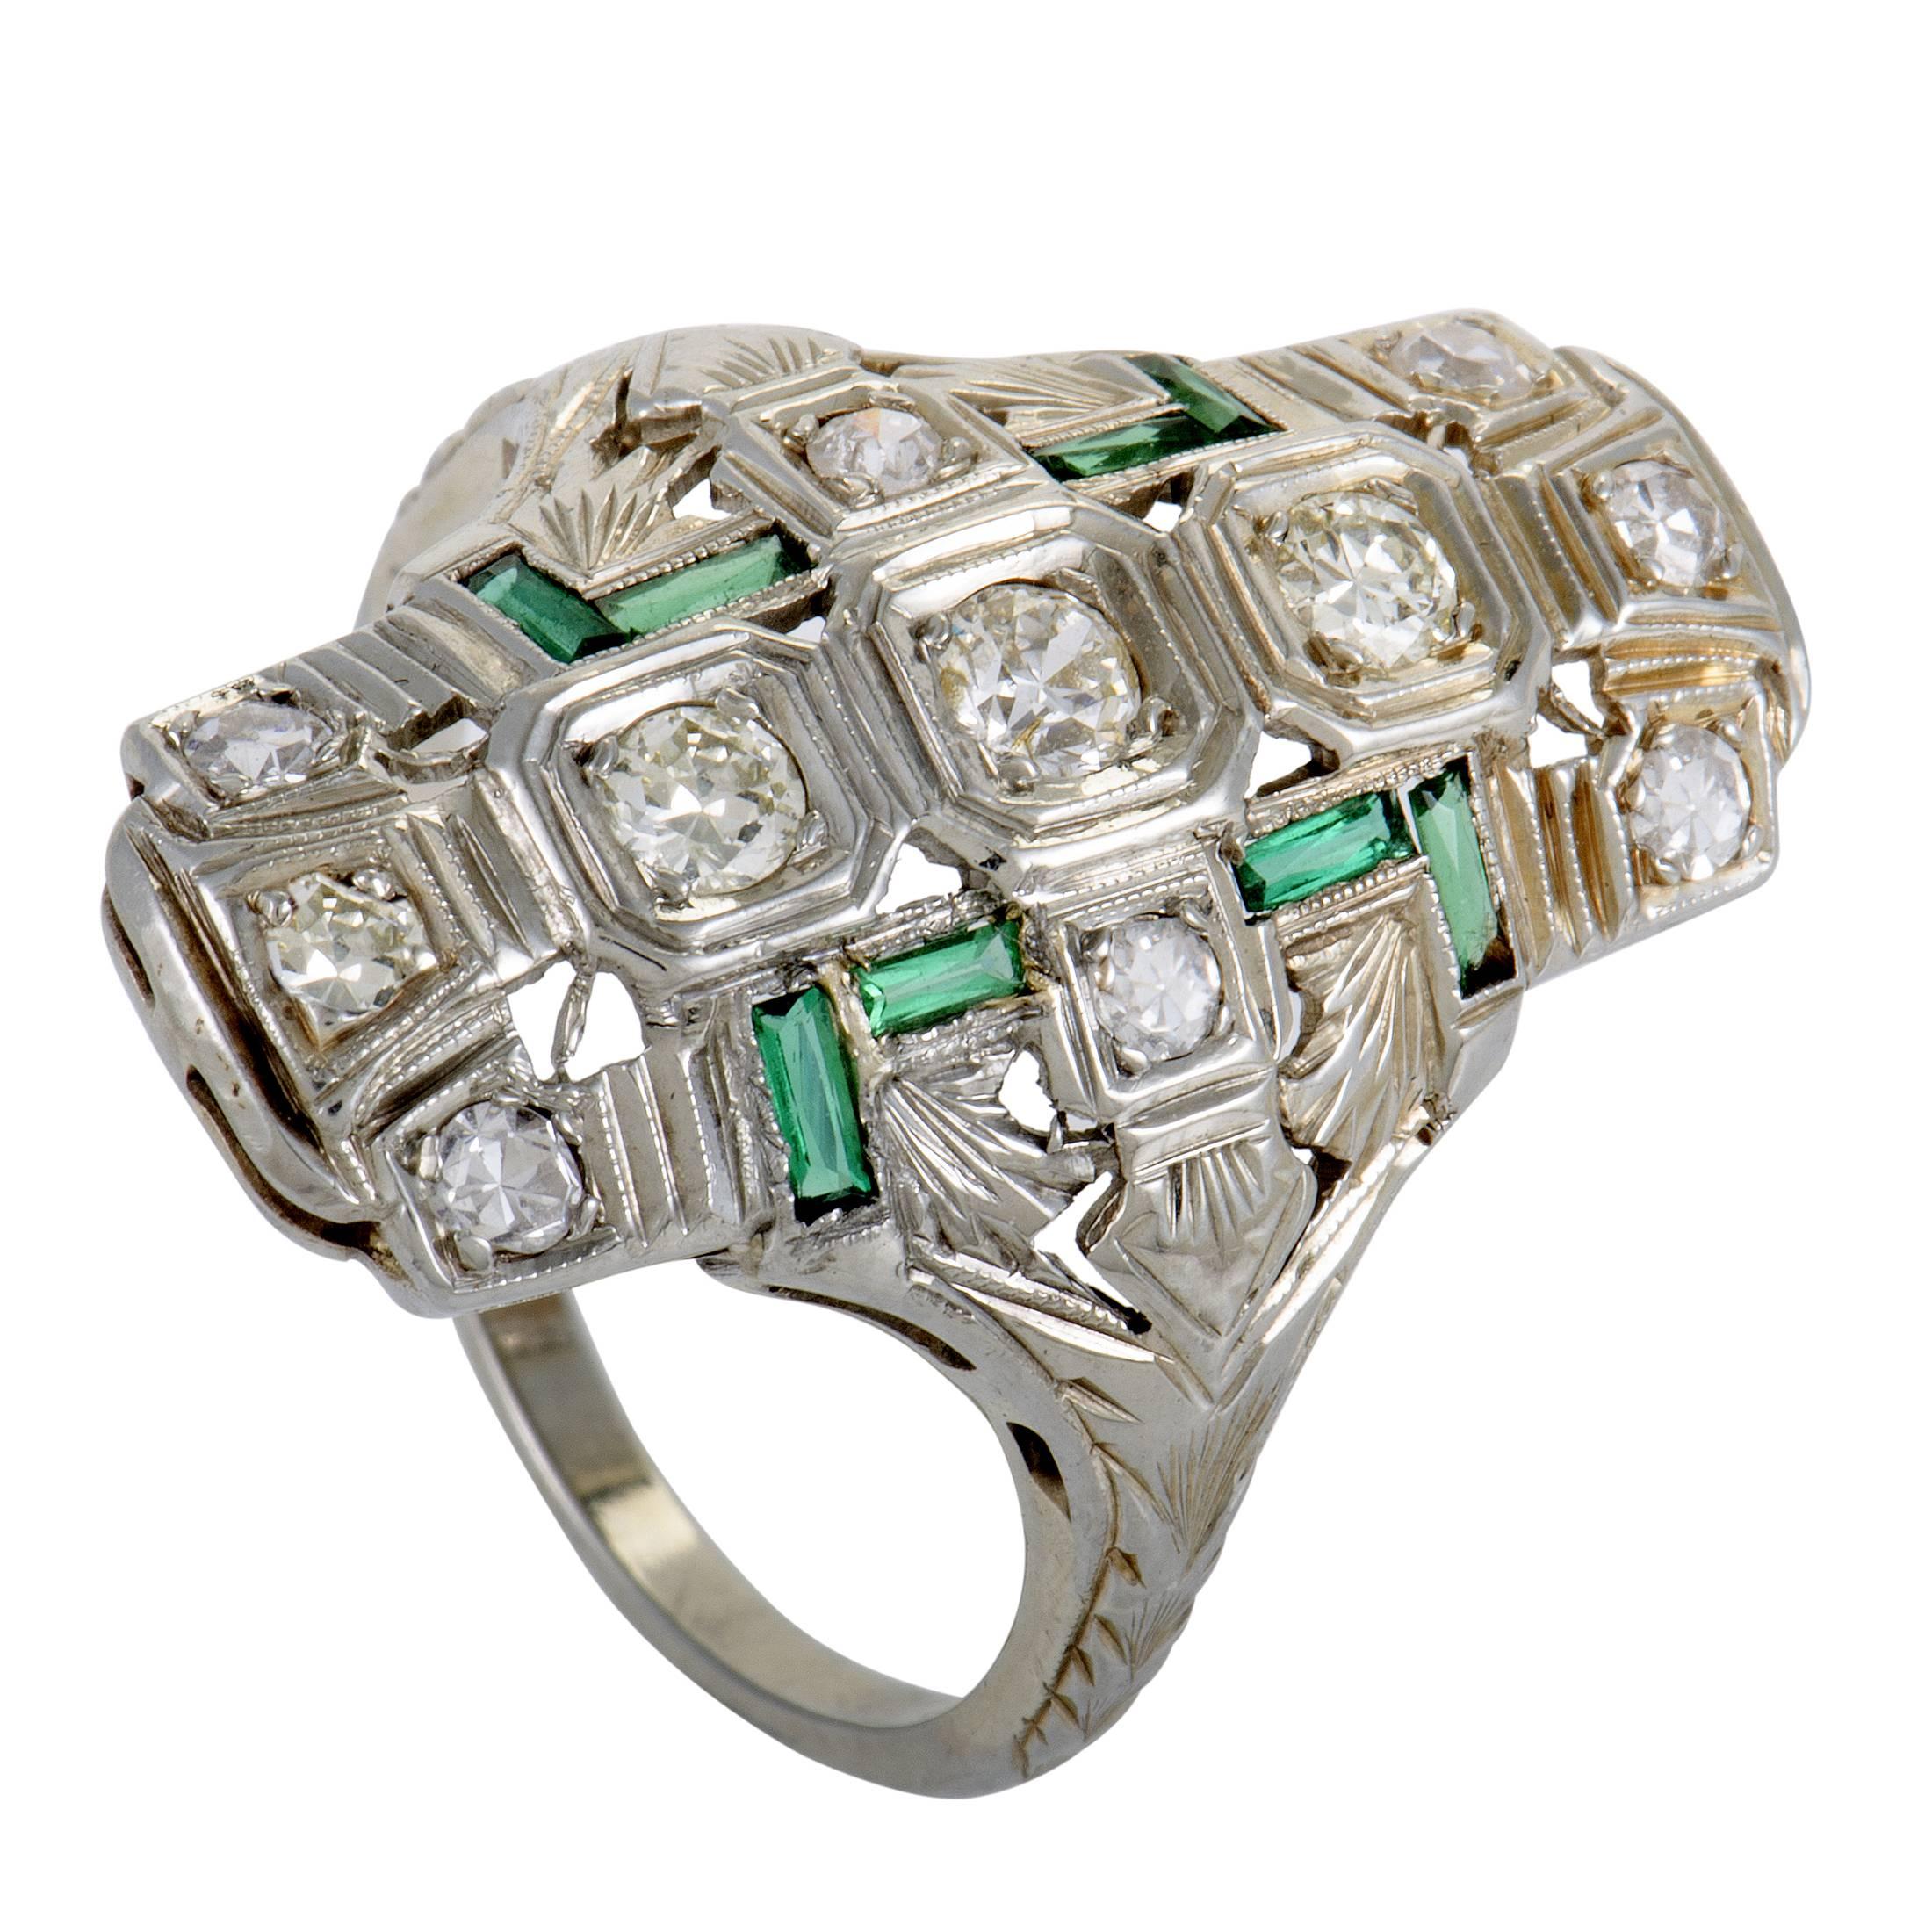 White Gold Diamond and Emerald Ring